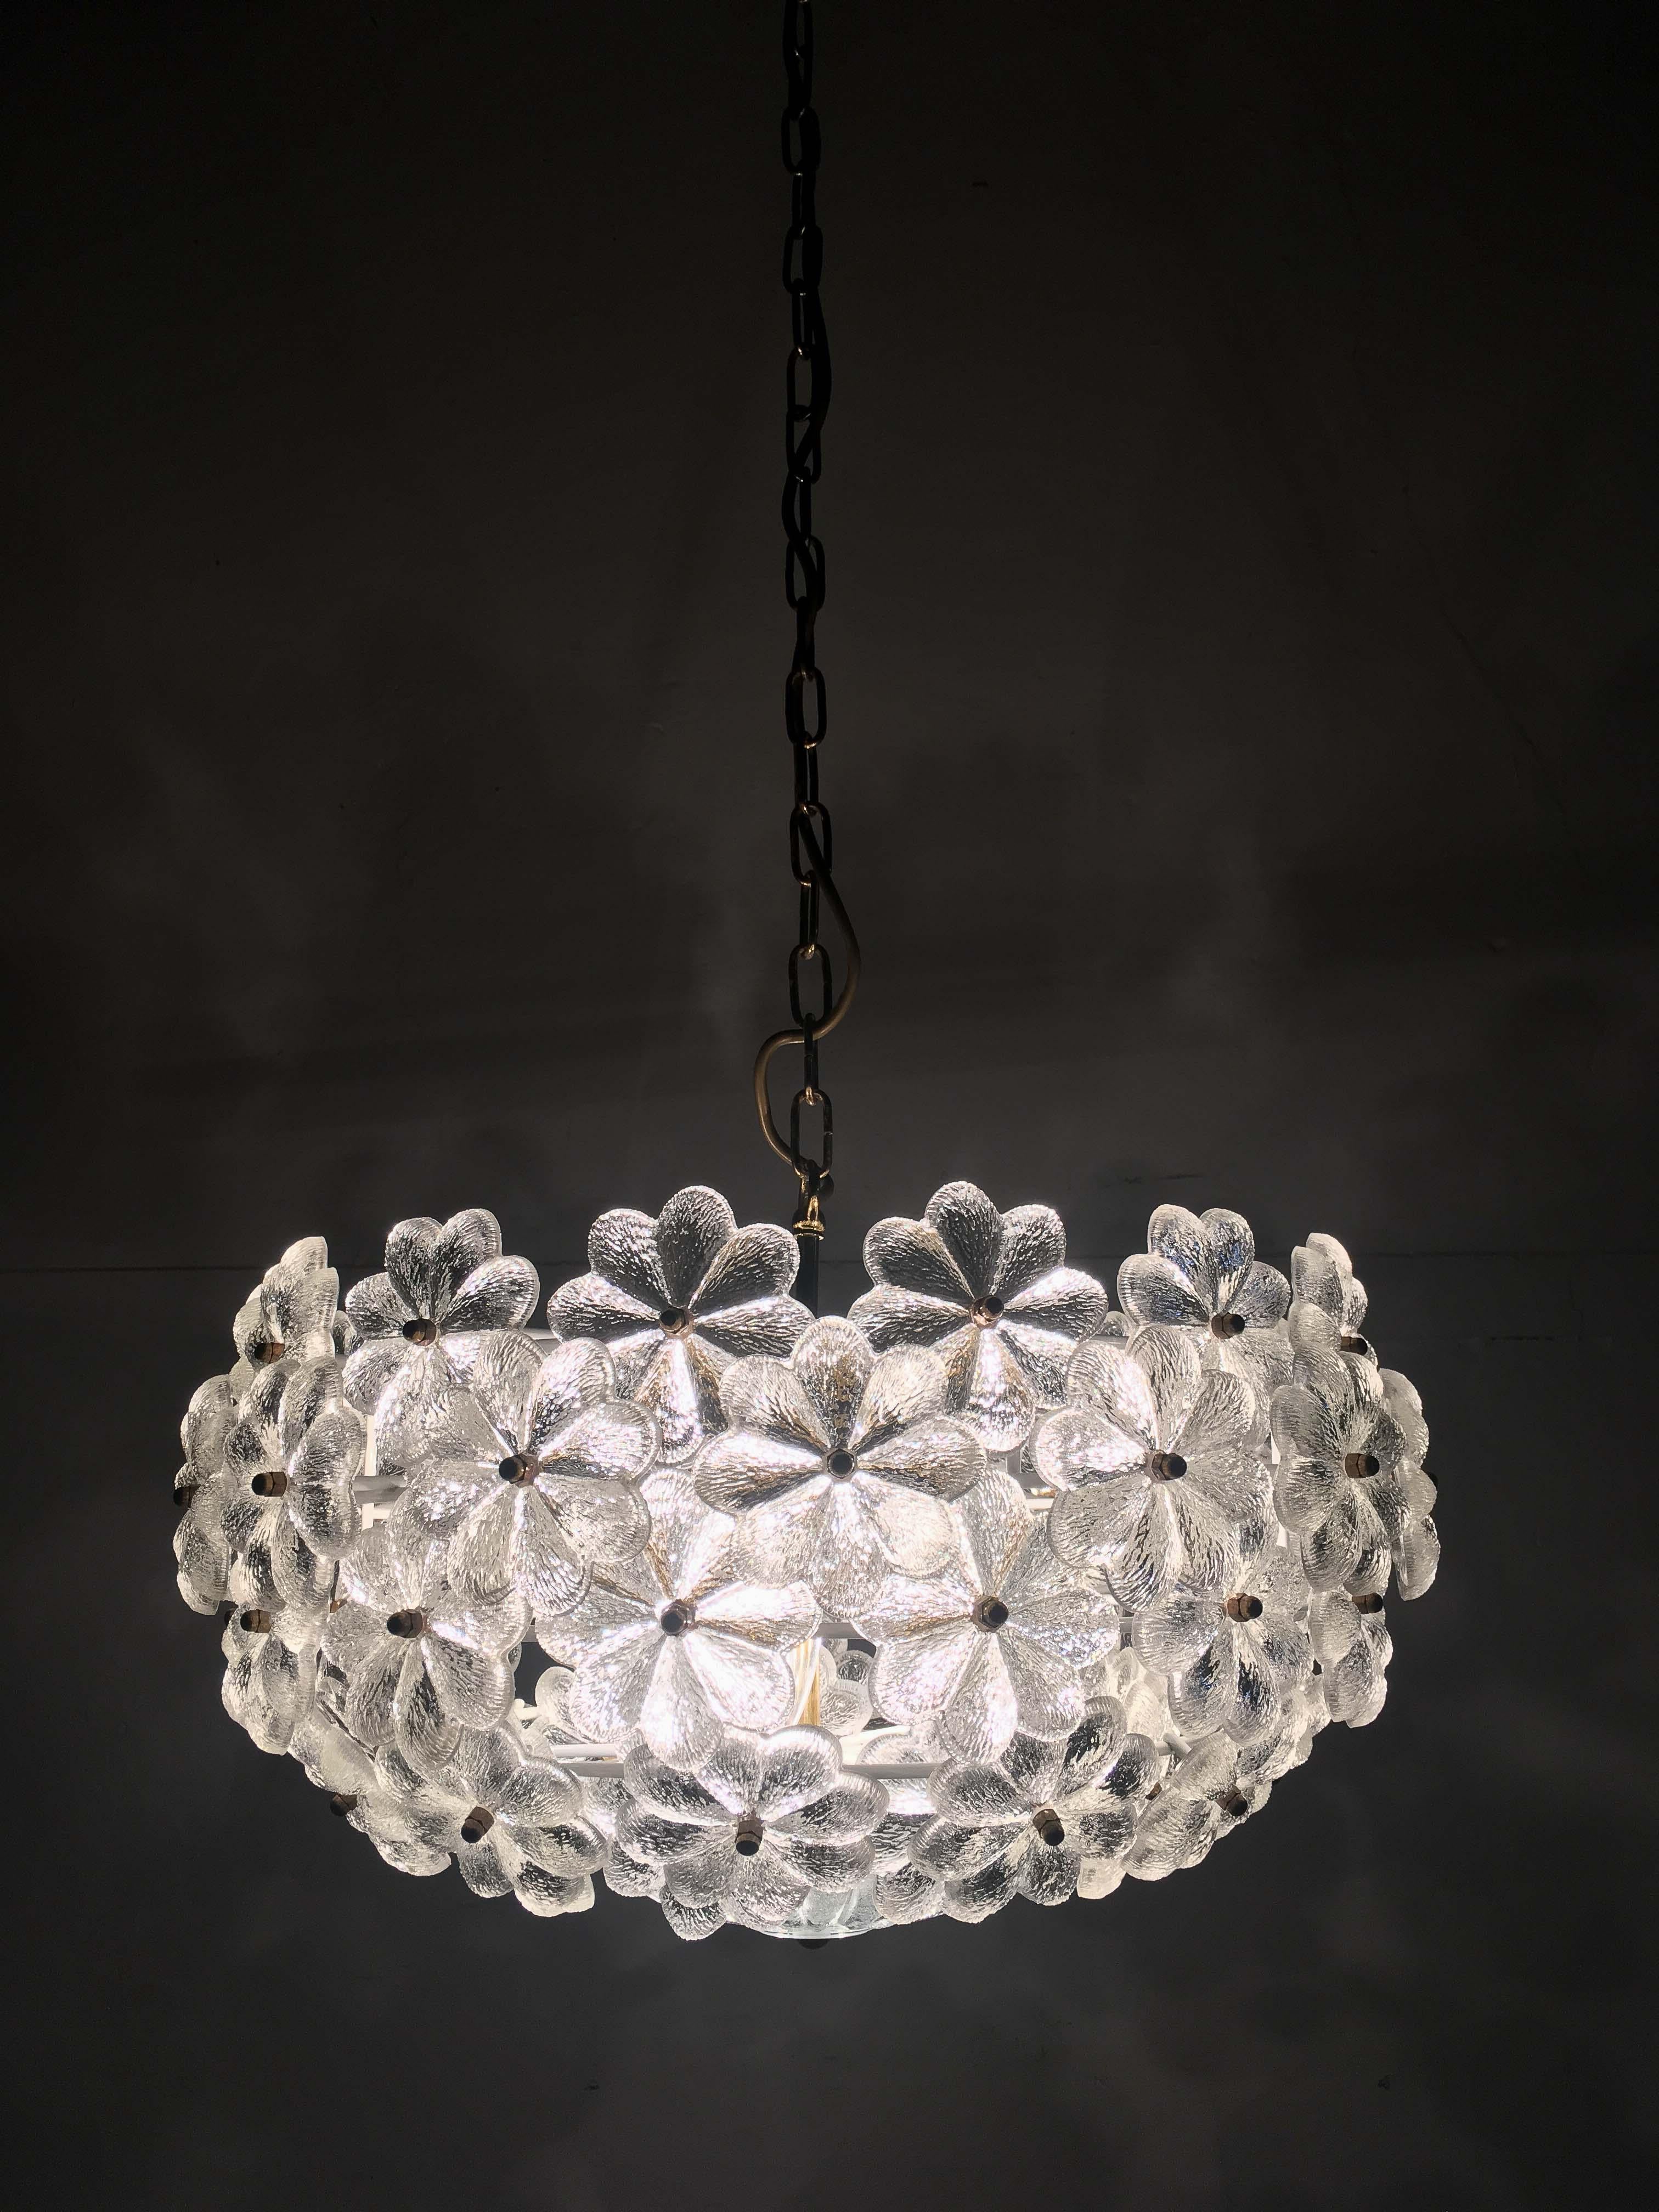 Midcentury Large and Stunning Glass Chandelier by Ernst Palme Glassflowers 60s  1